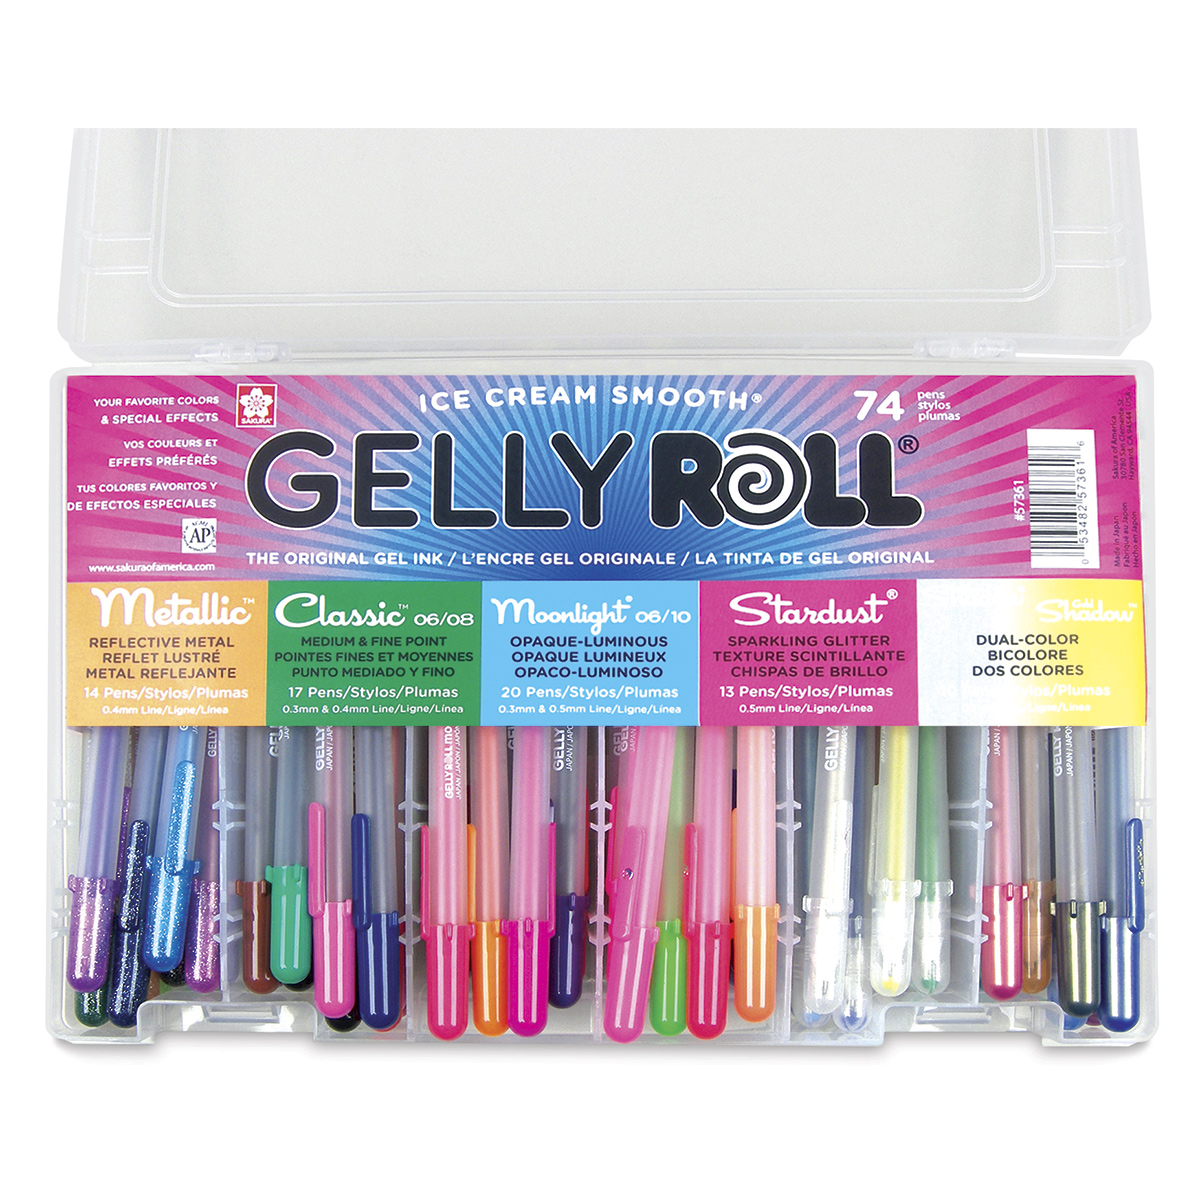 Sakura Gelly Roll Pens and Sets